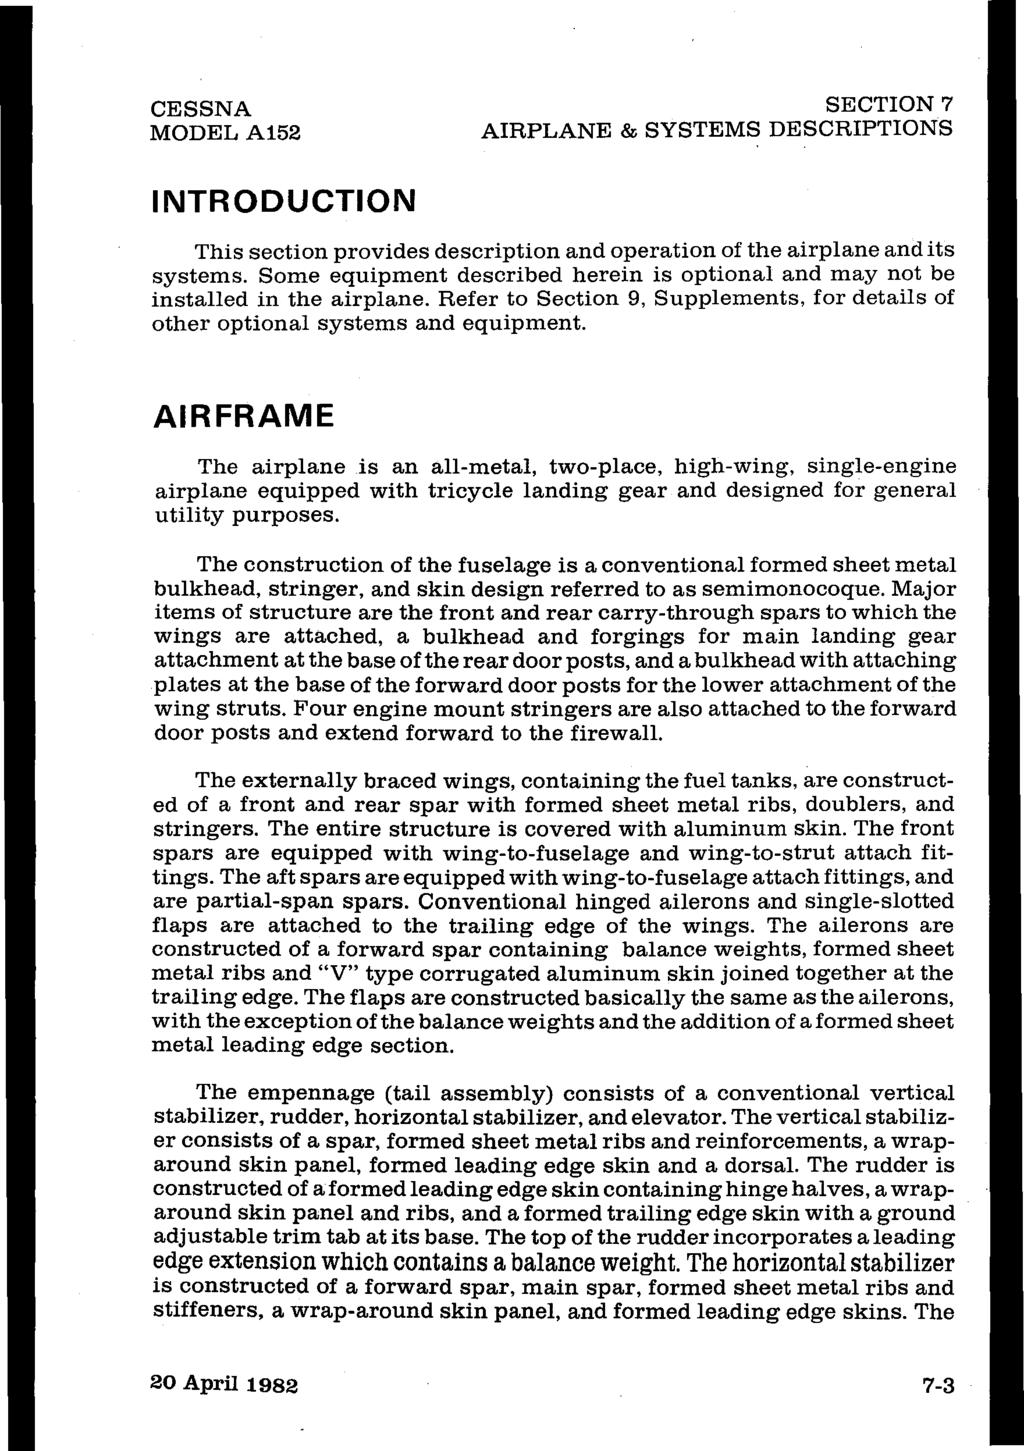 CESSNA MODEL A152 SECTION 7 AIRPLANE & SYSTEMS DESCRIPTIONS INTRODUCTION This section provides description and operation of the airplane and its systems.